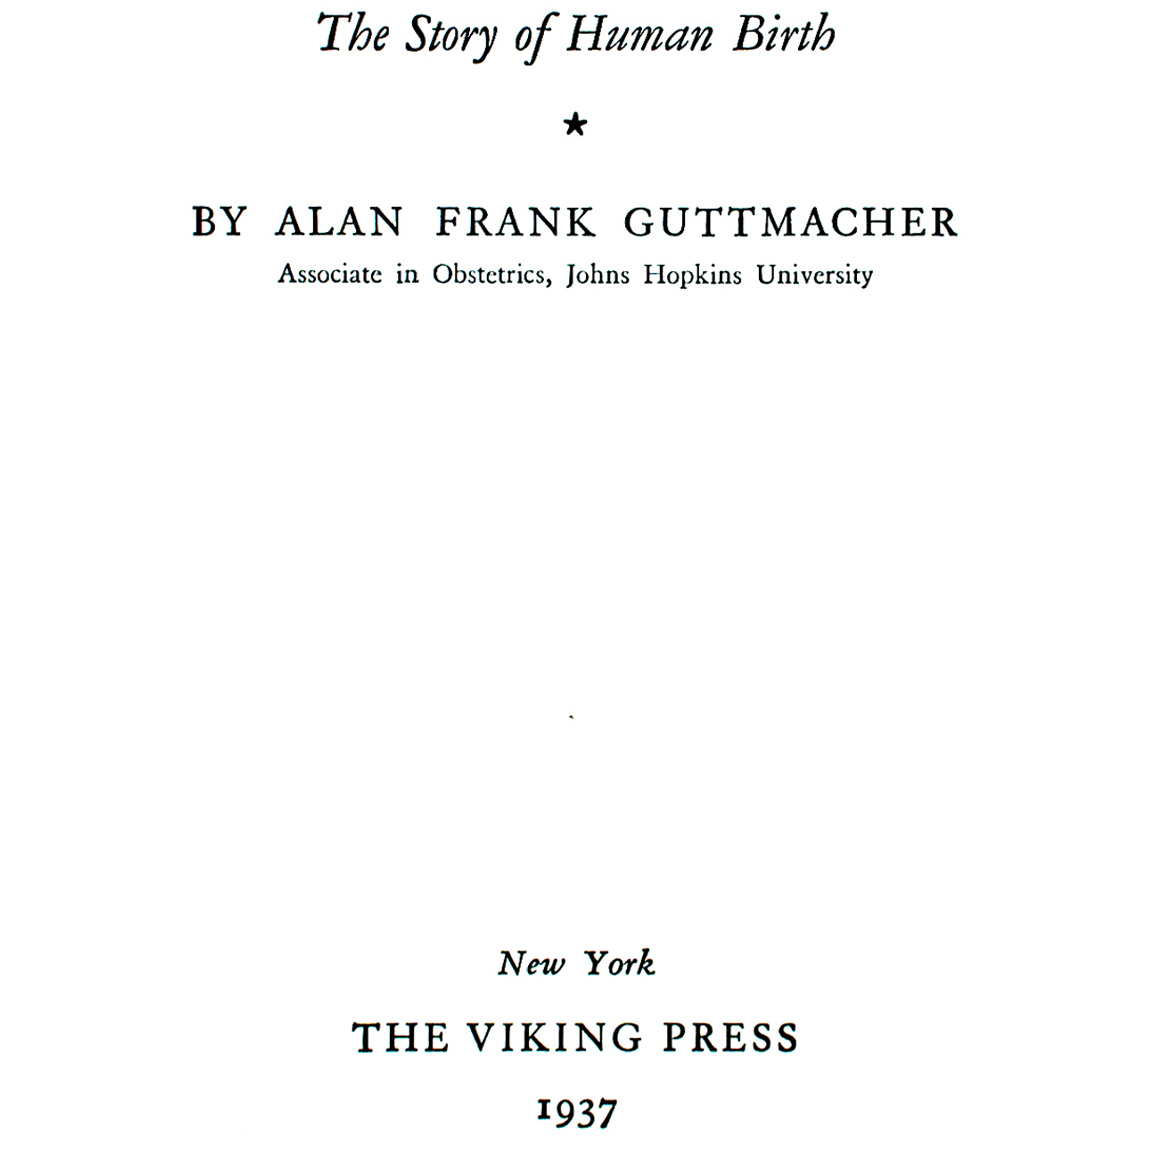 1937-GUTTMACHER The Story of Human Birth-title page